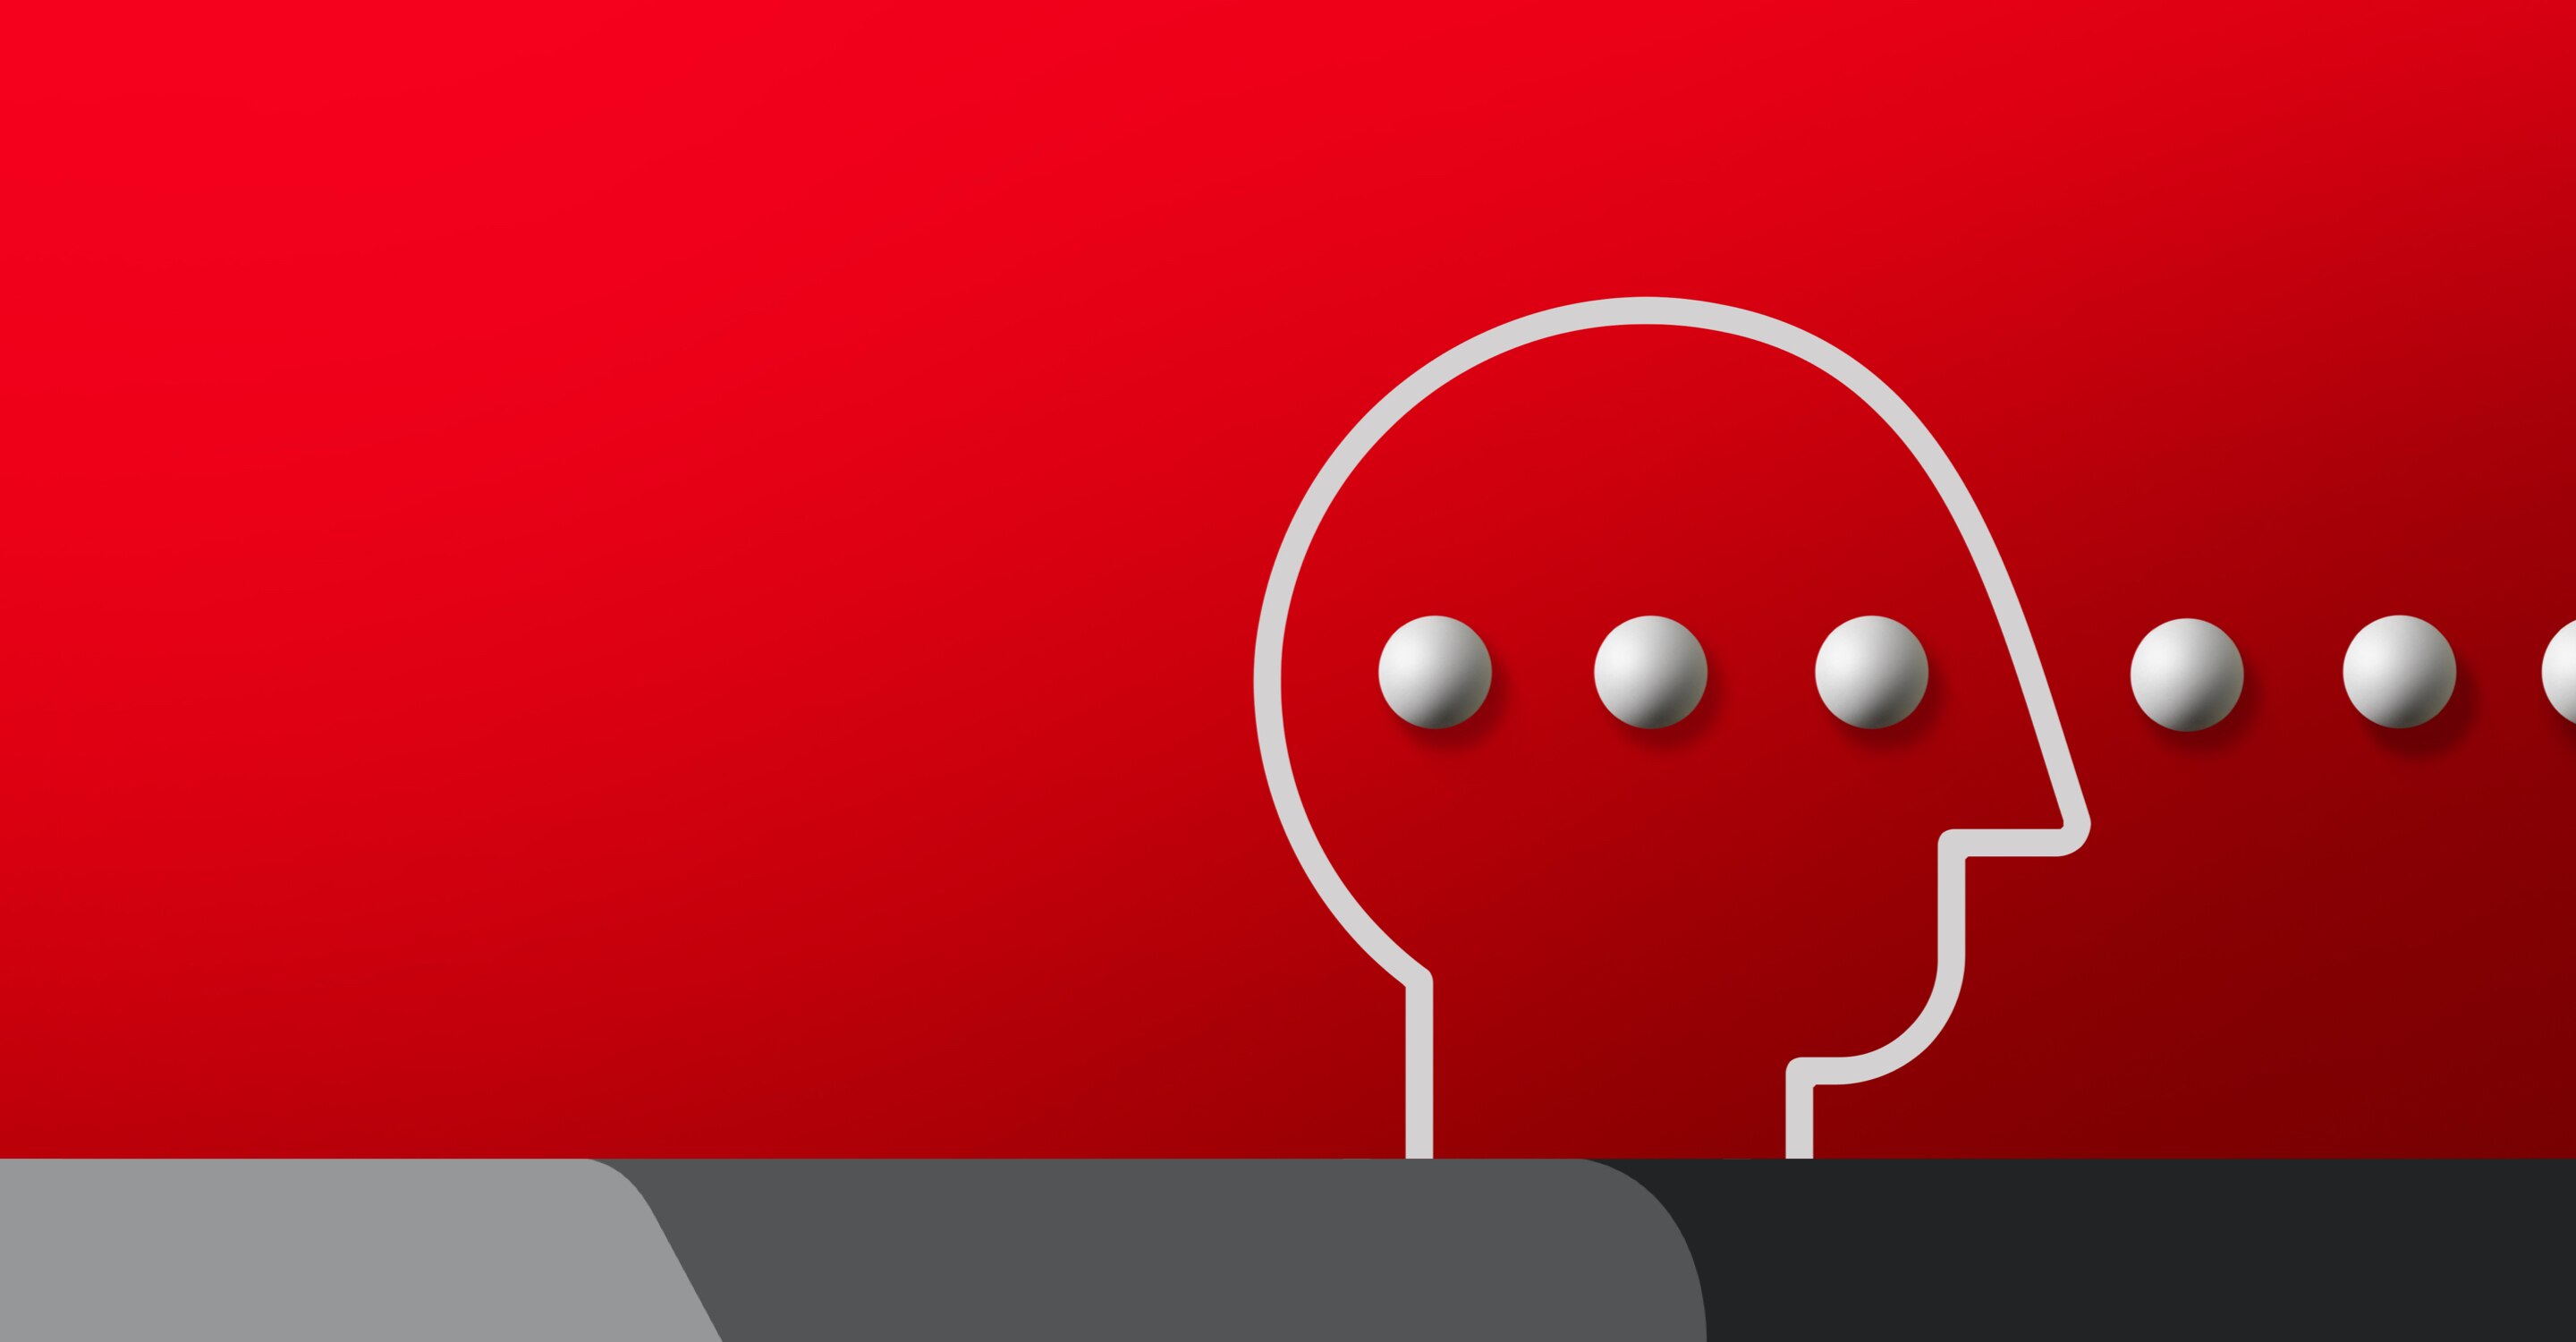 abstract of head outline and white spheres on red background